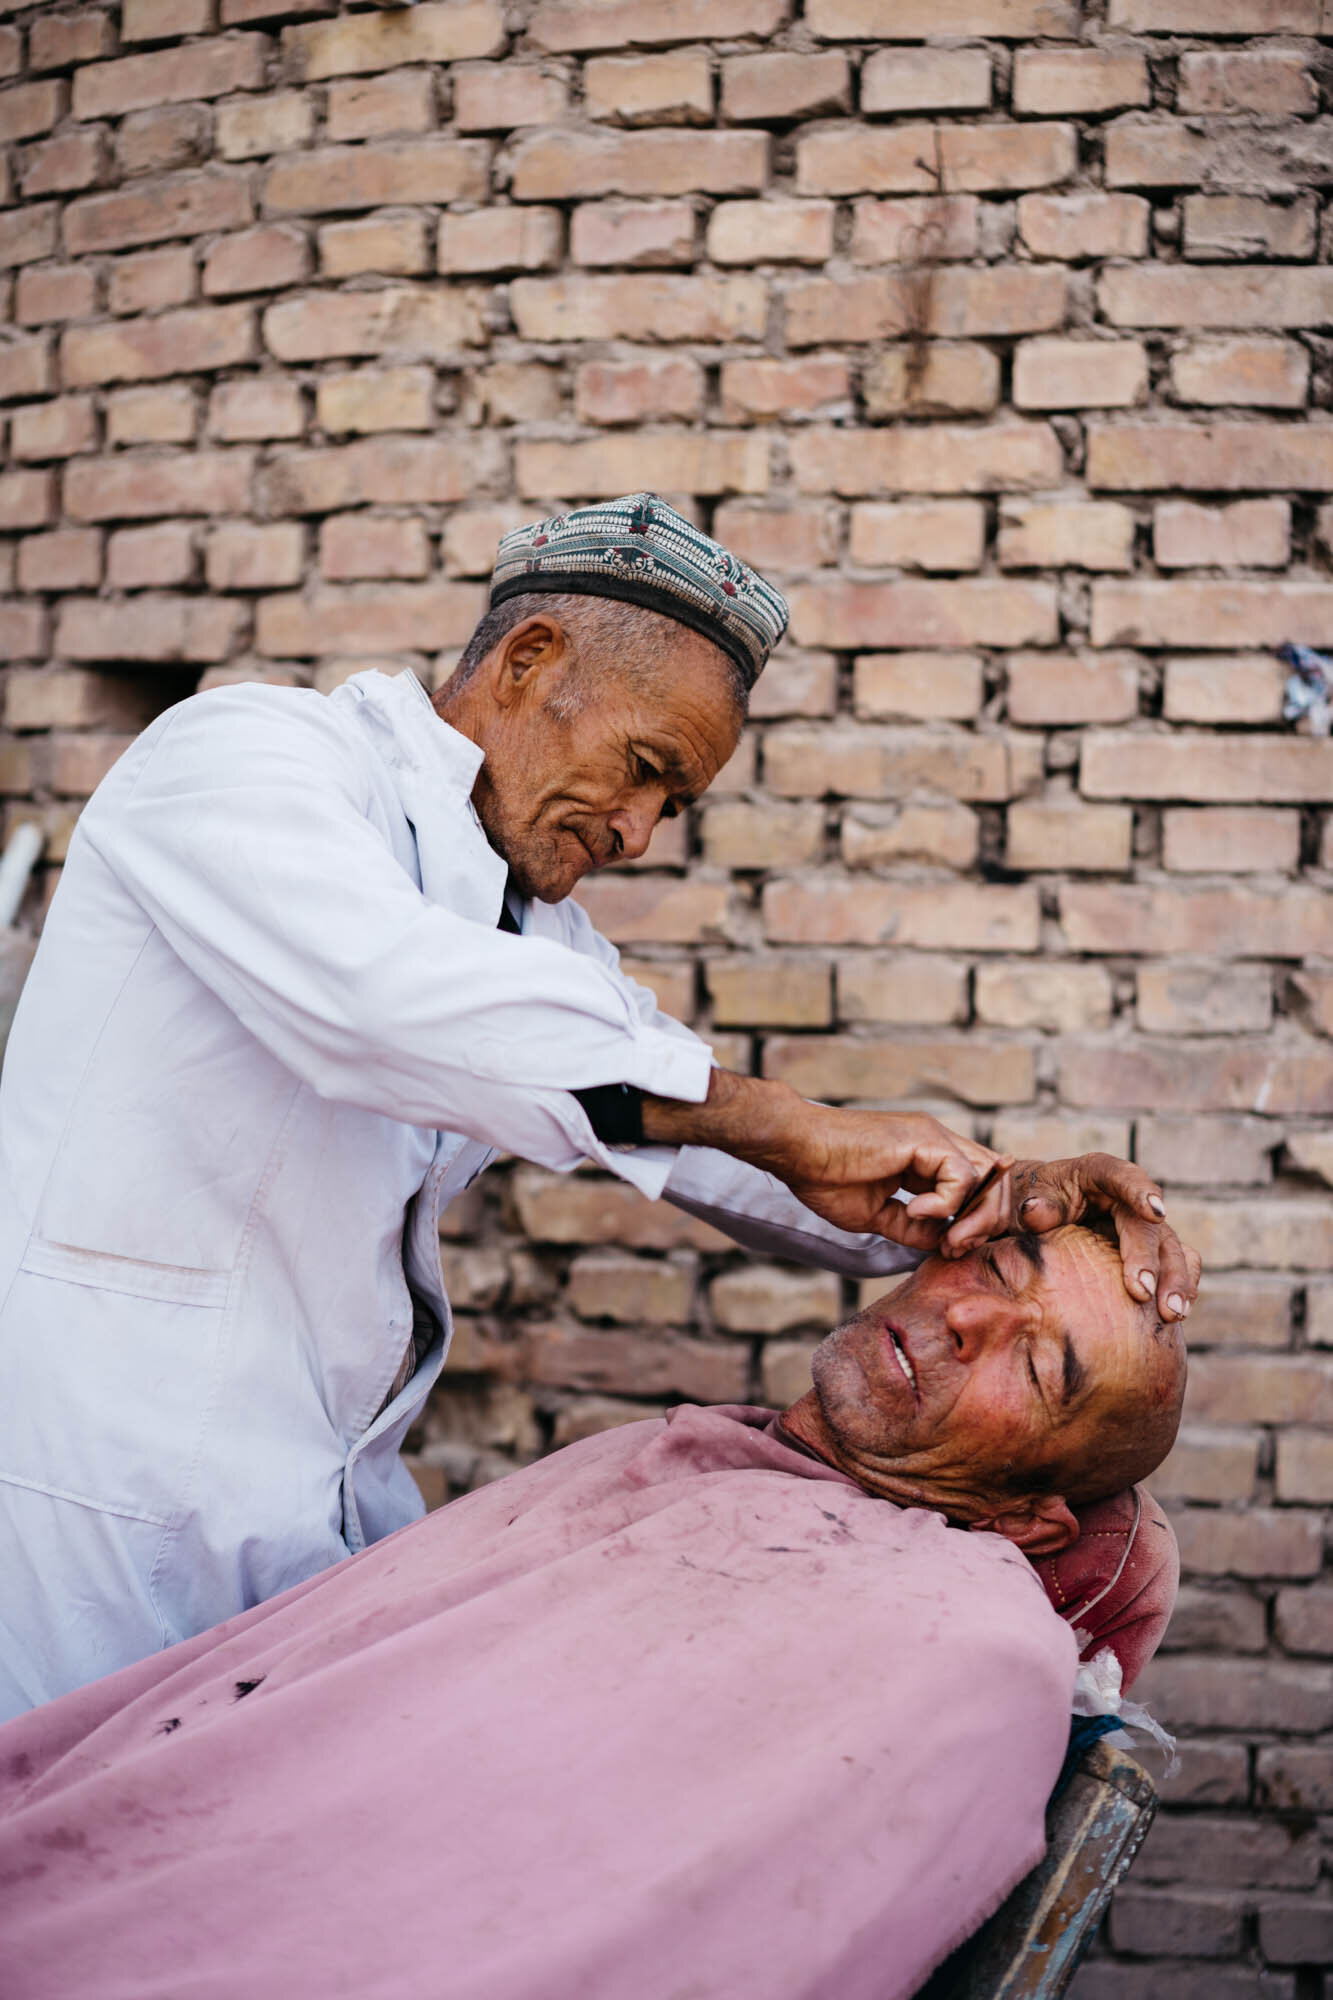  A barber at work in the bazaar 